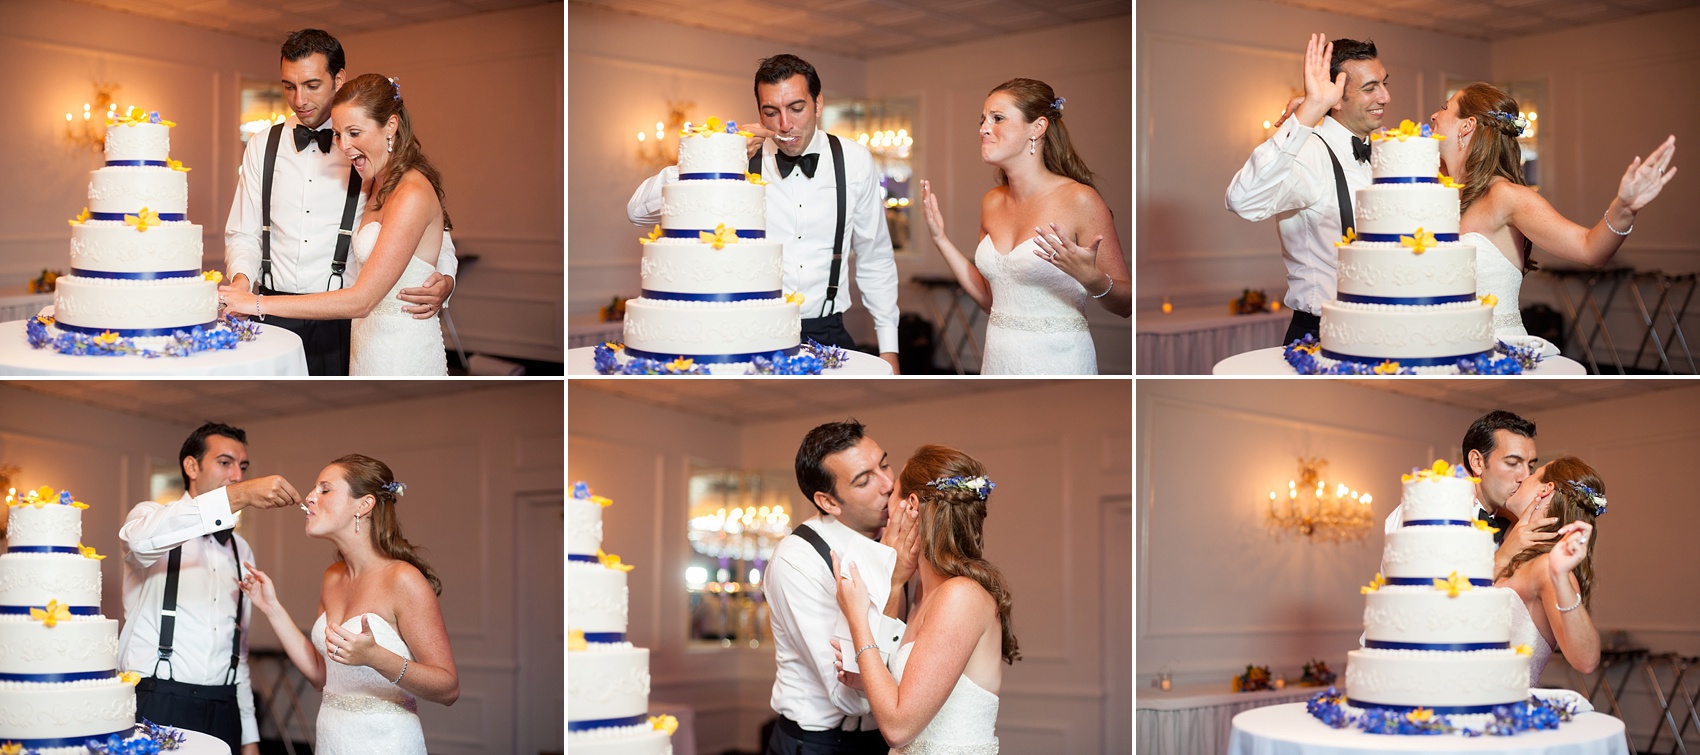 Perona Farms wedding photos cake cutting for a colorful summer celebration. Pictures by New Jersey photographer Mikkel Paige Photography.